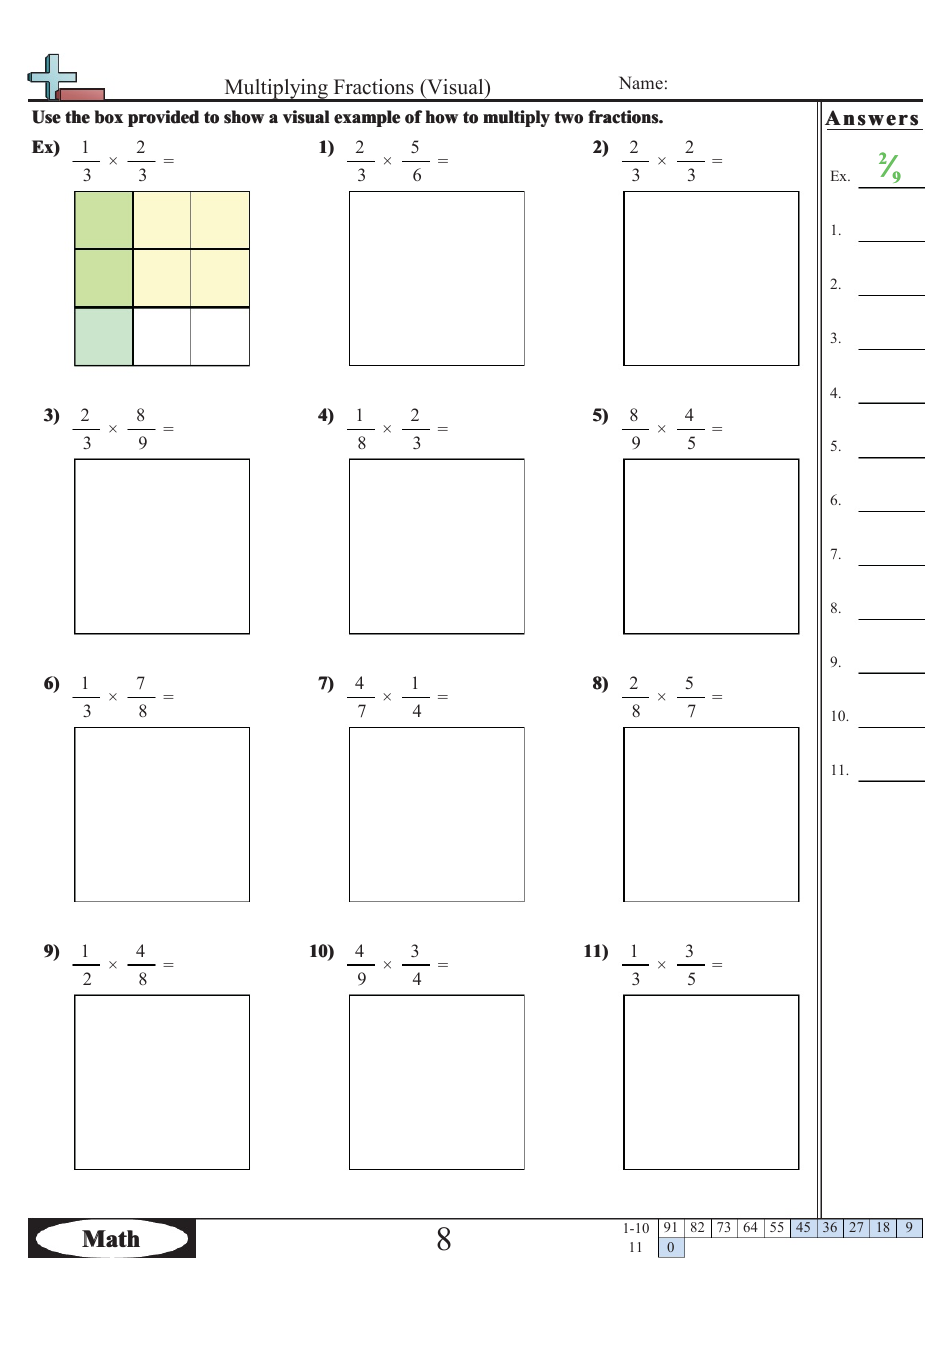 Multiplying Fractions Visual Worksheet With Answers Download Printable PDF Templateroller